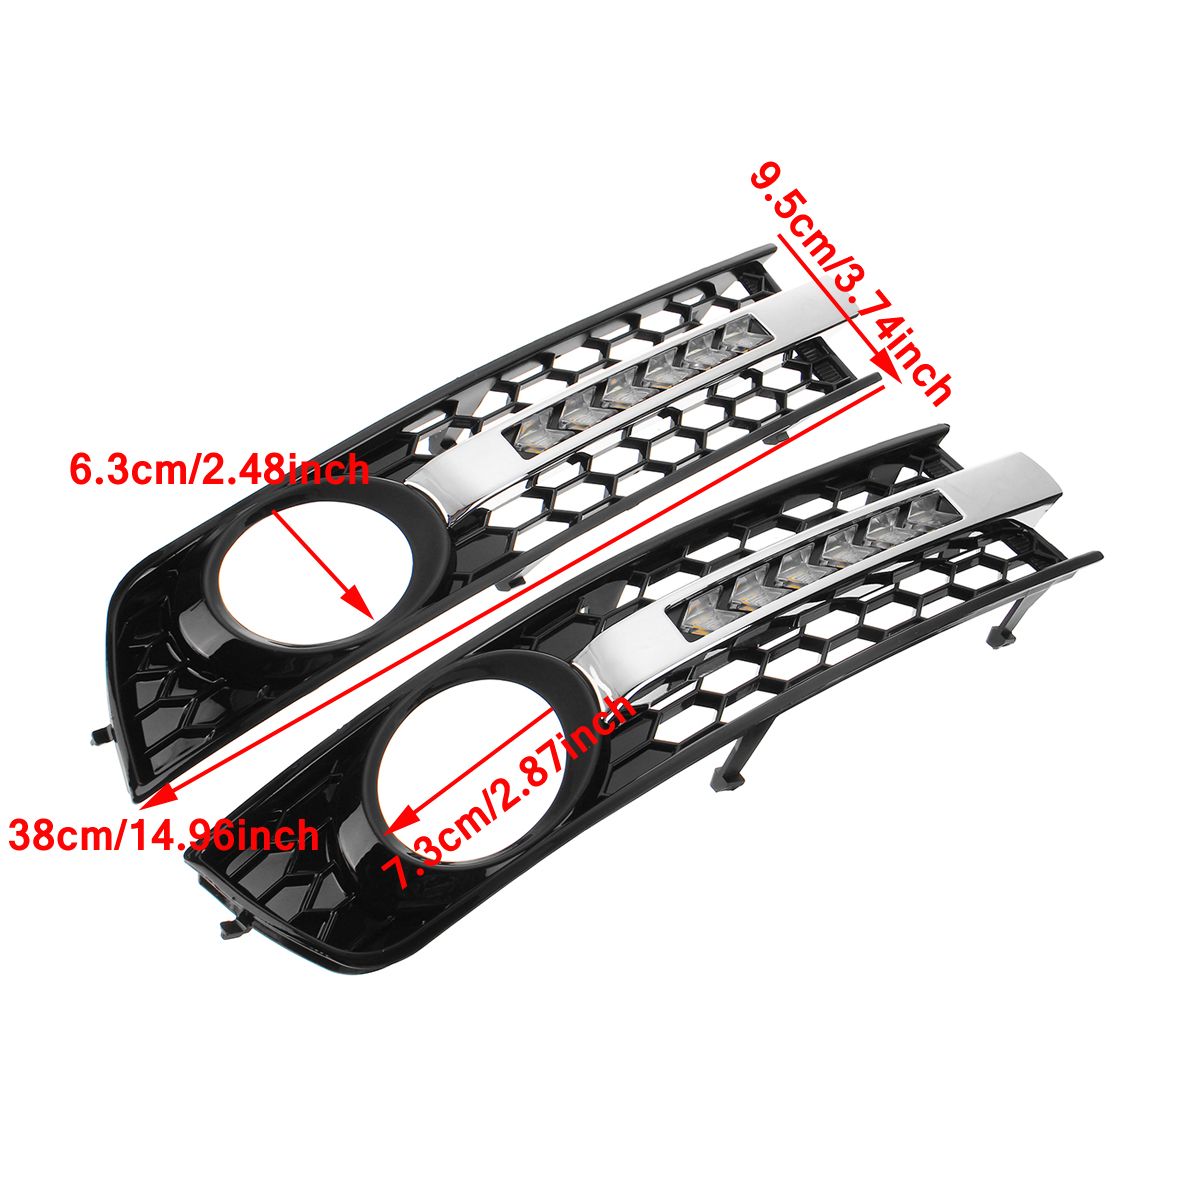 LED-Mesh-Front-Fog-Light-Cover-Plating-Mesh-Grille-Yellow-Flowing-Turn-Signal-Lamp-White-DRL-For-Aud-1664272